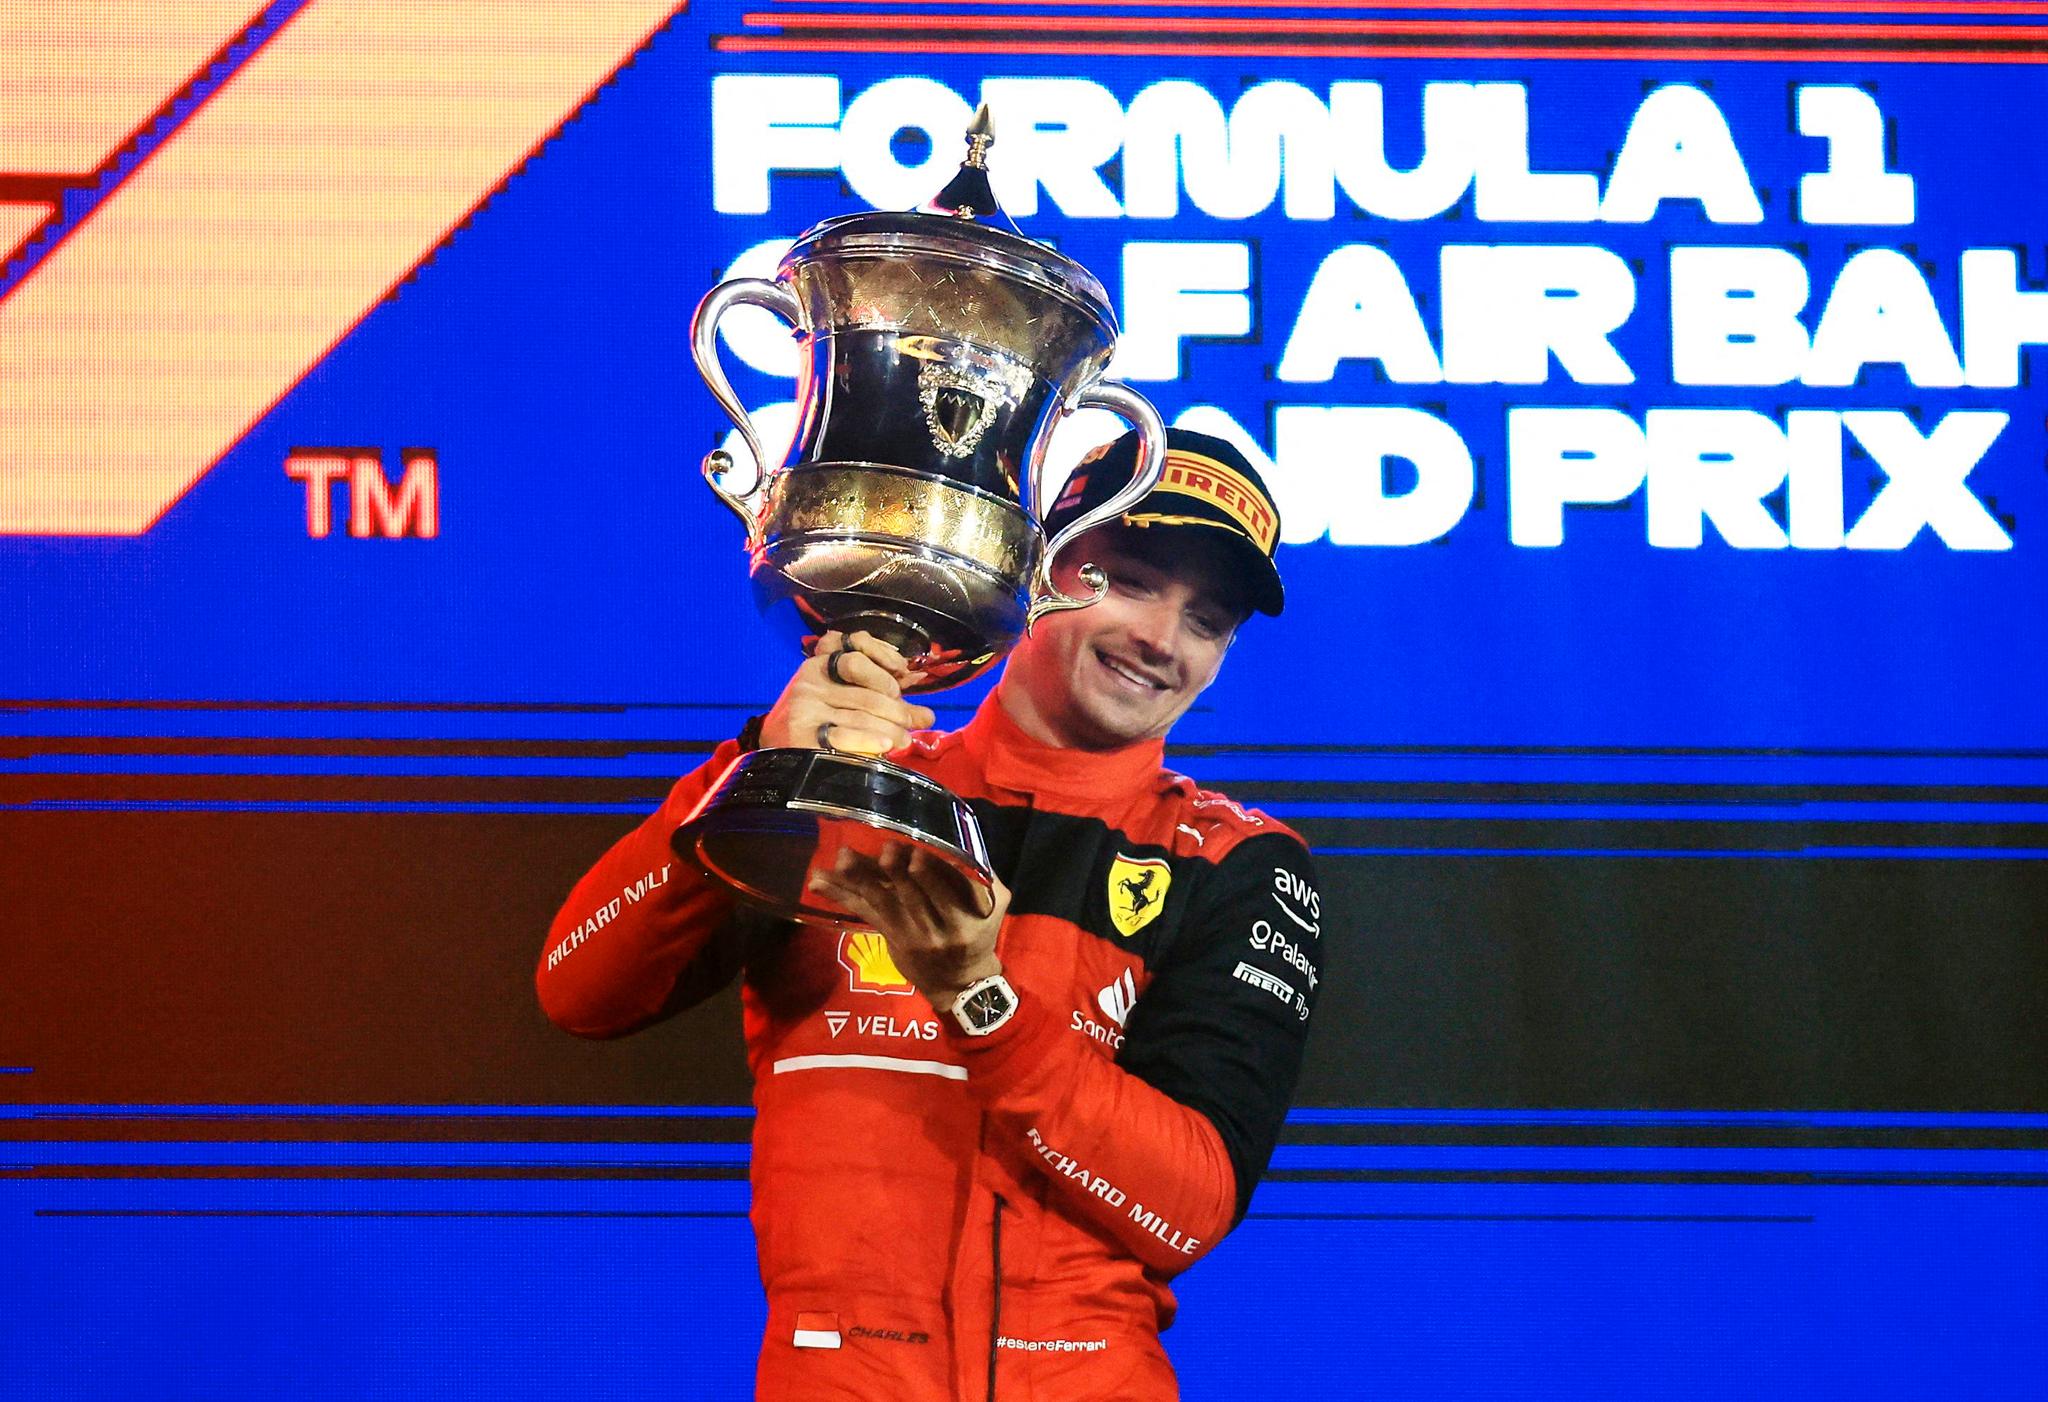 Verstappen has to rest after crazy duel – Leclerc takes his third Formula 1 win